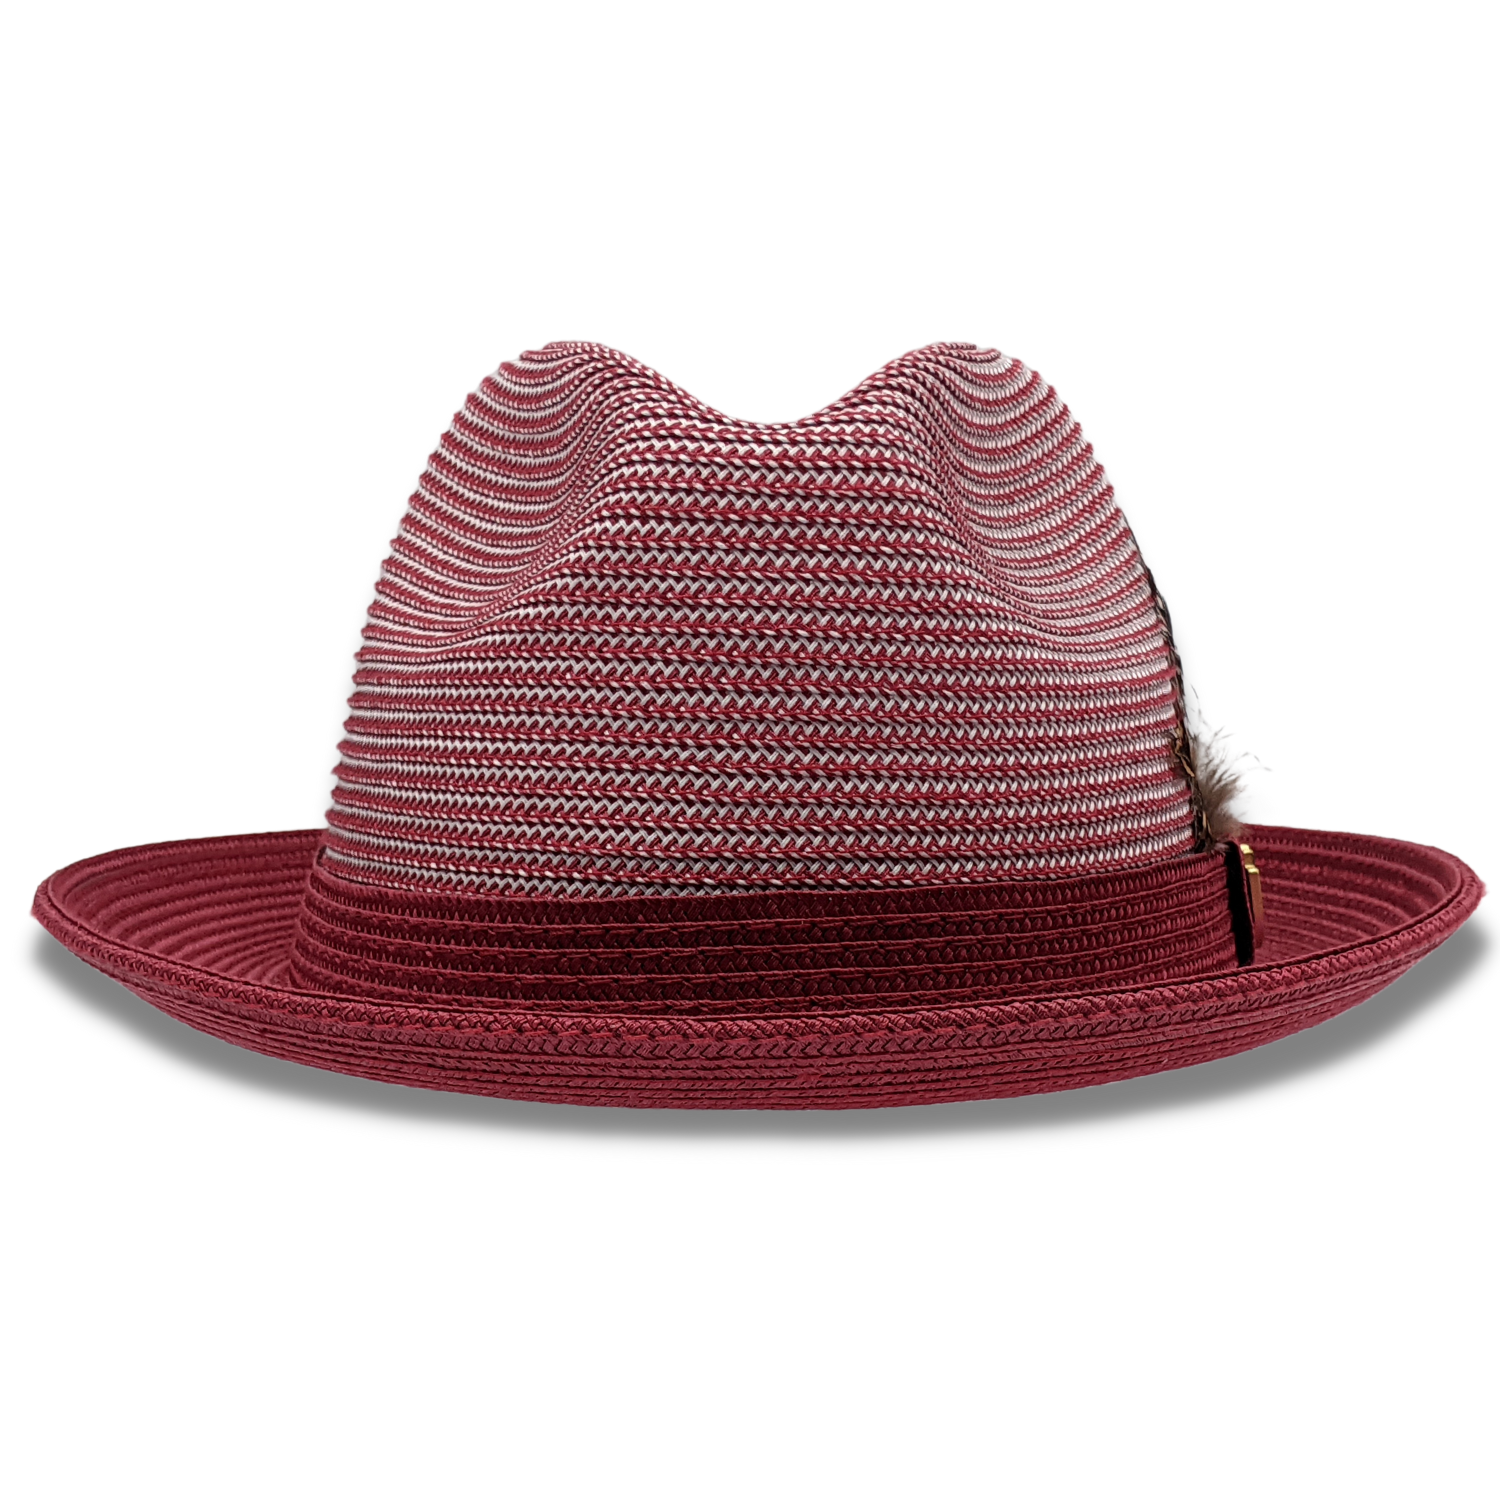 Men's Braided Two Tone Stingy Brim Pinch Fedora Hat in Cranberry - H73